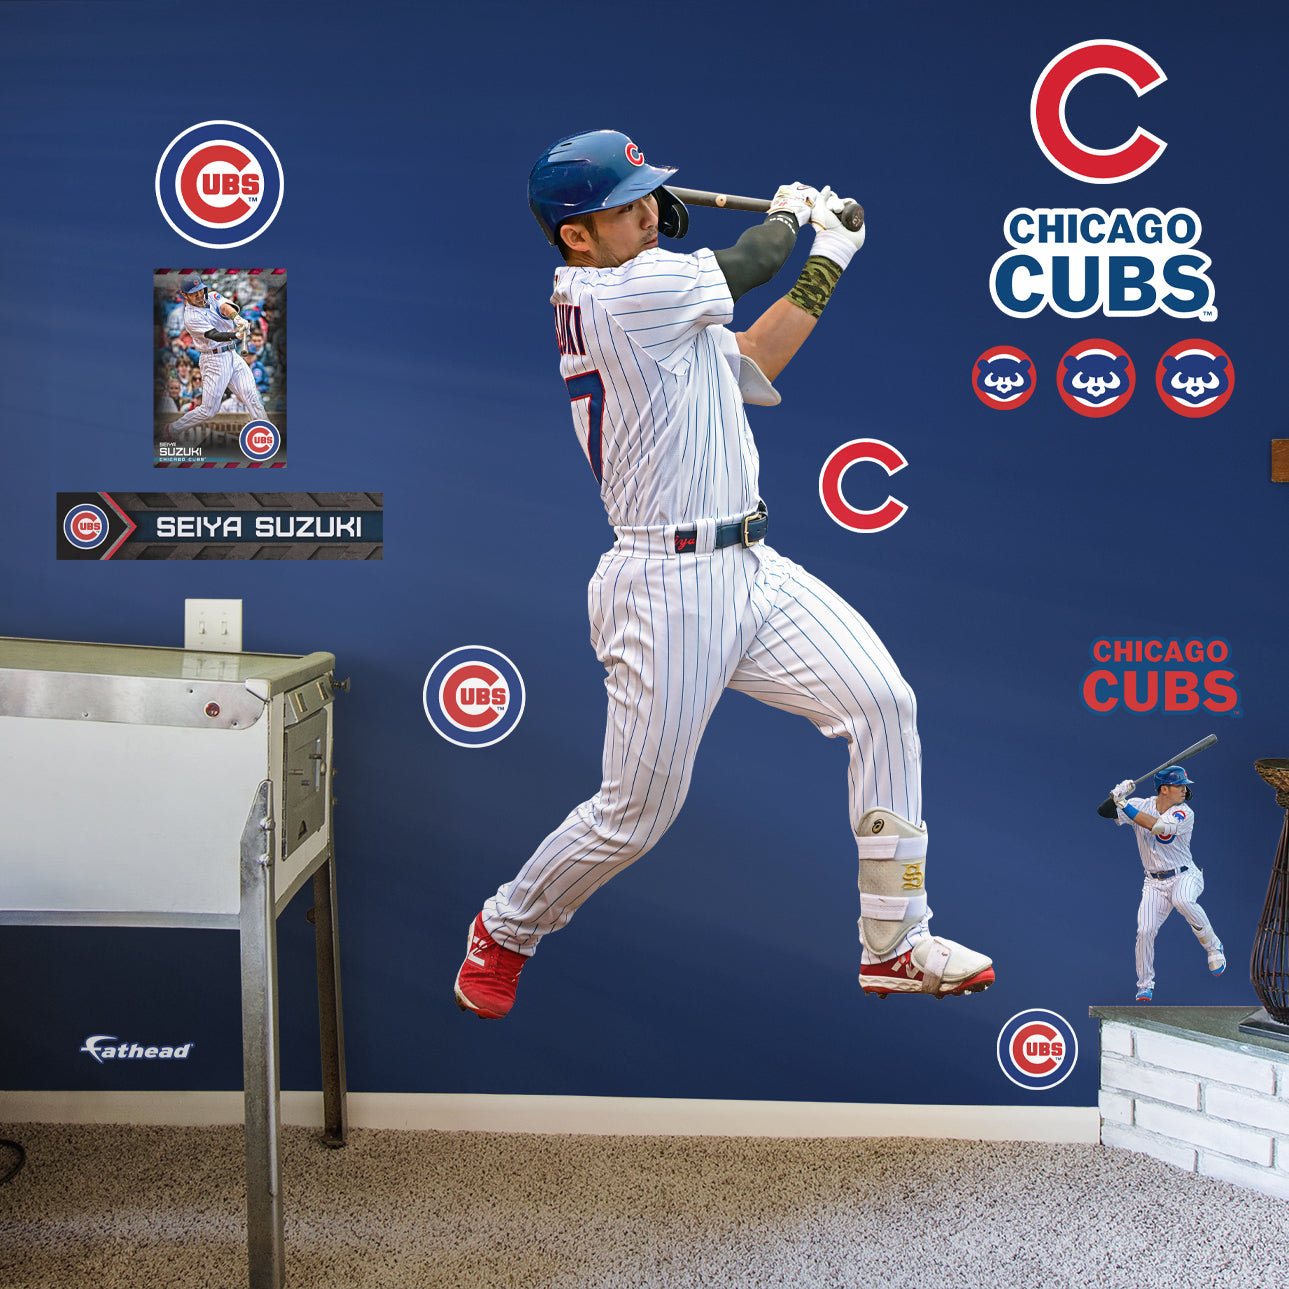 47 Best Chicago Cubs Wallpaper ideas in 2023  chicago cubs wallpaper, cubs  wallpaper, chicago cubs